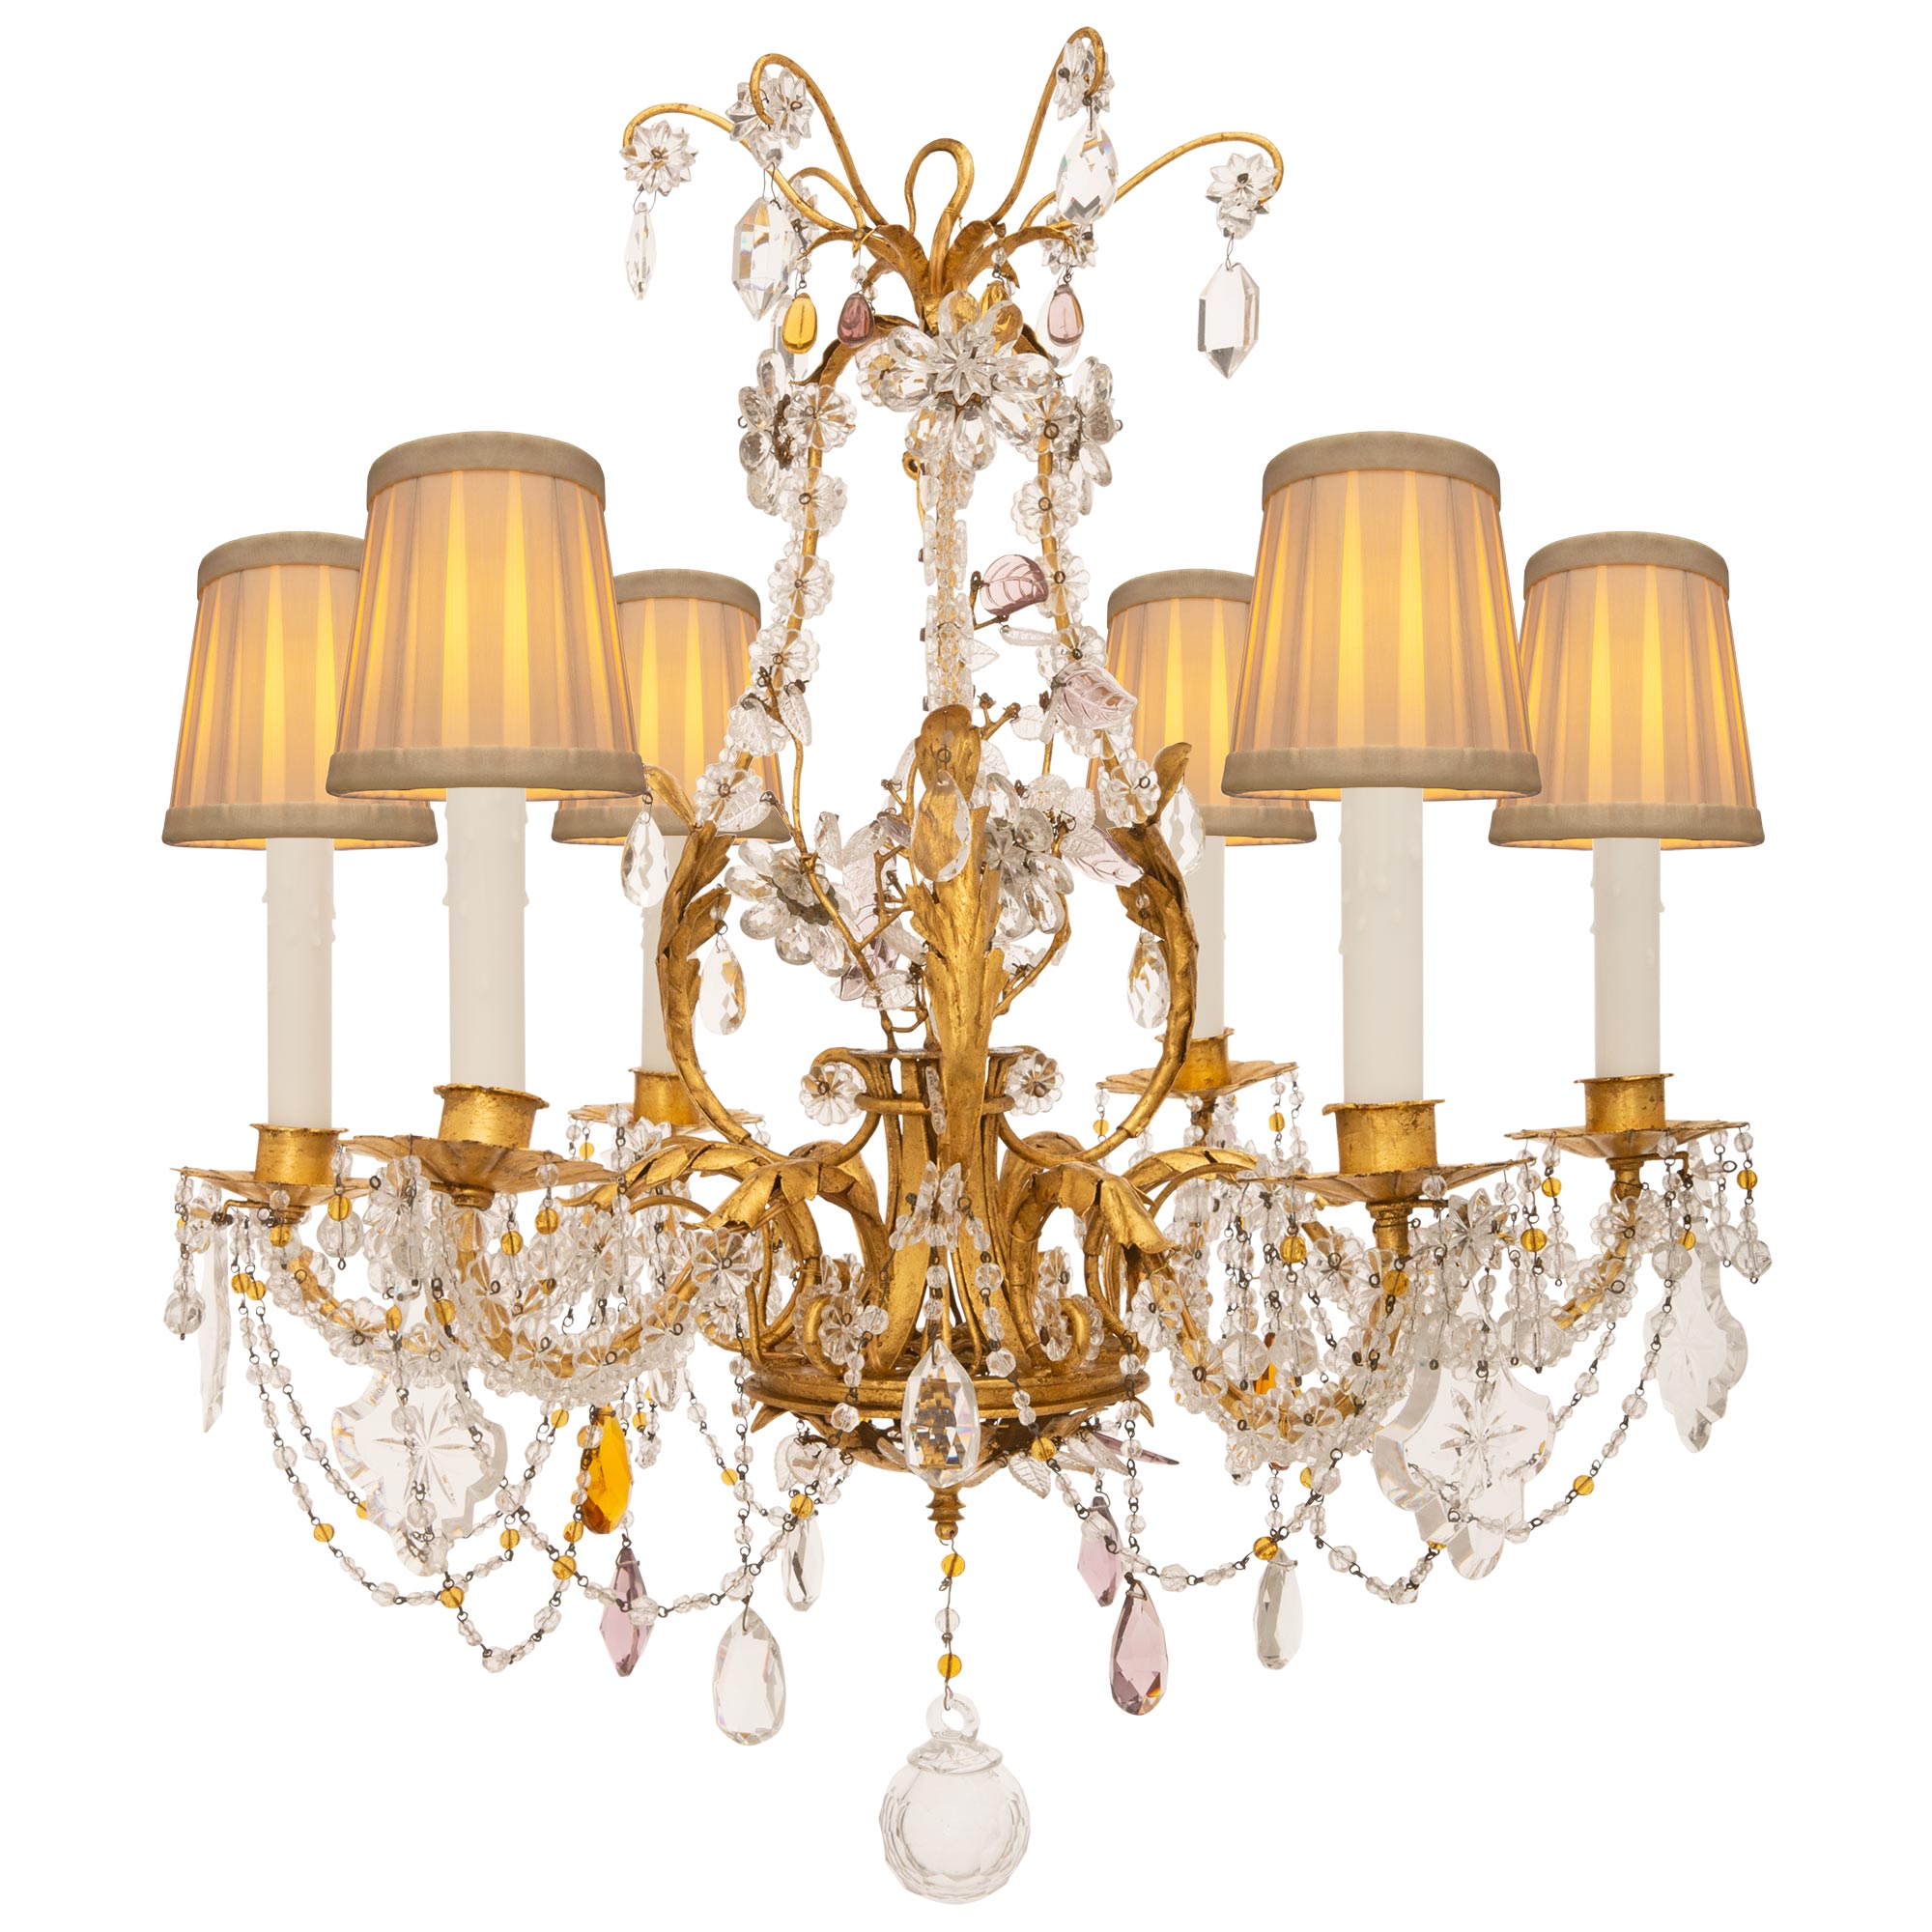 French Turn Of The Century Louis XV St. Gilt Metal & Baccarat Crystal Chandelier For Sale